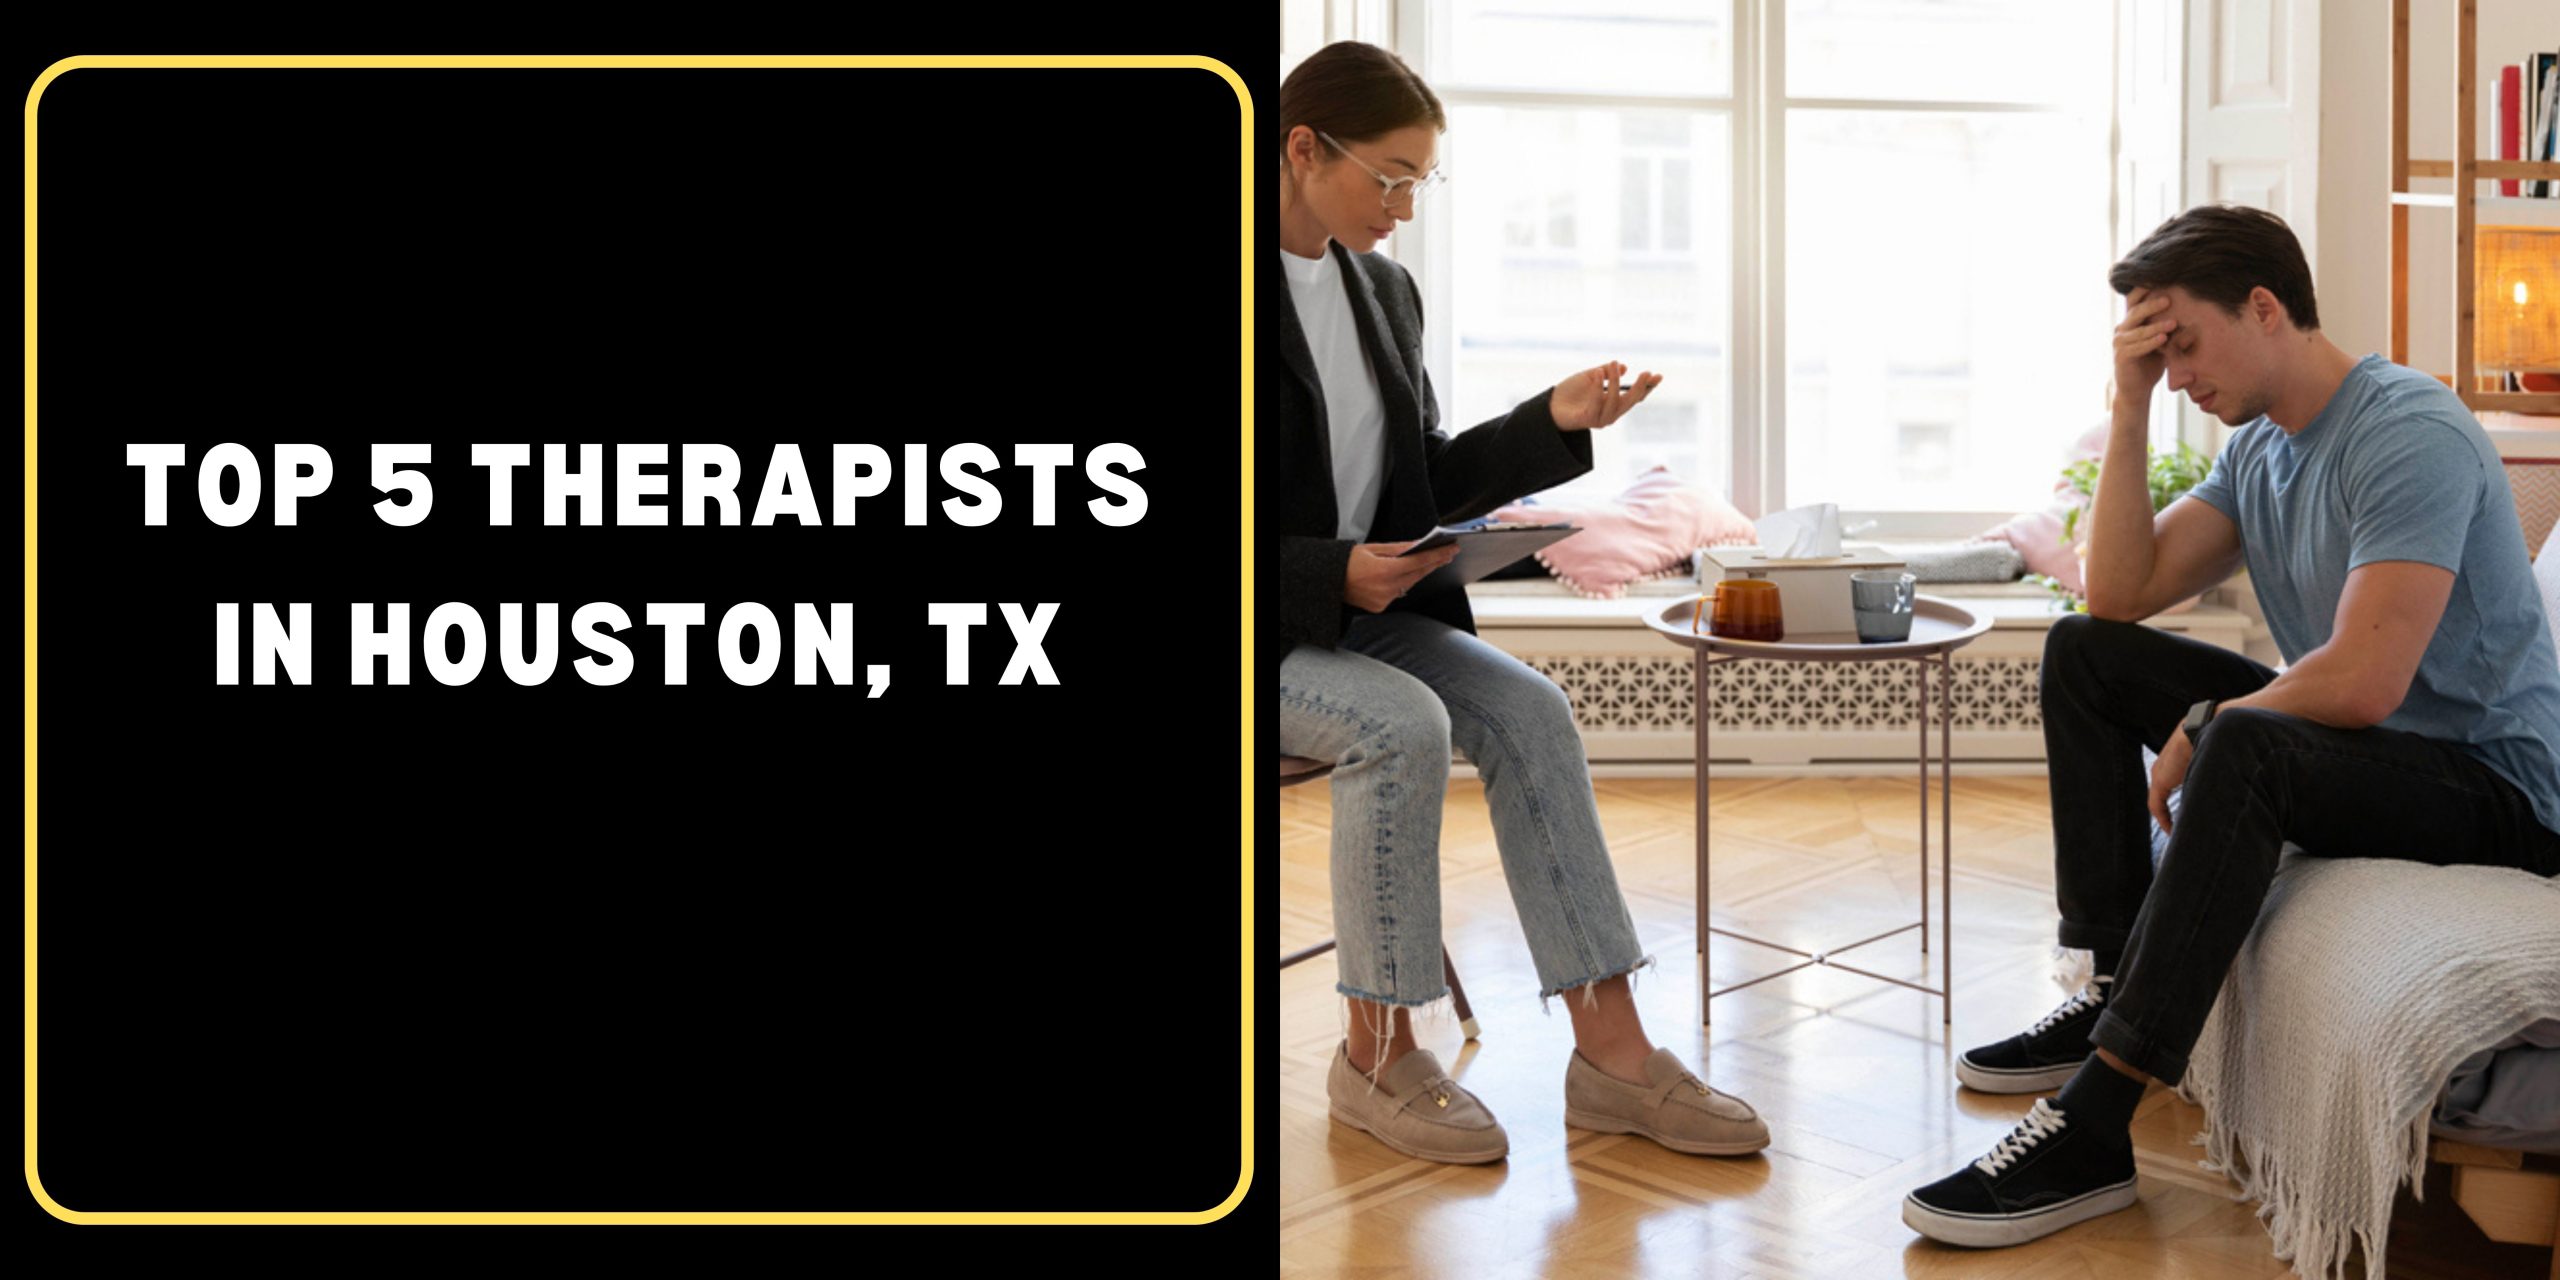 Top 5 Therapists In Houston, TX